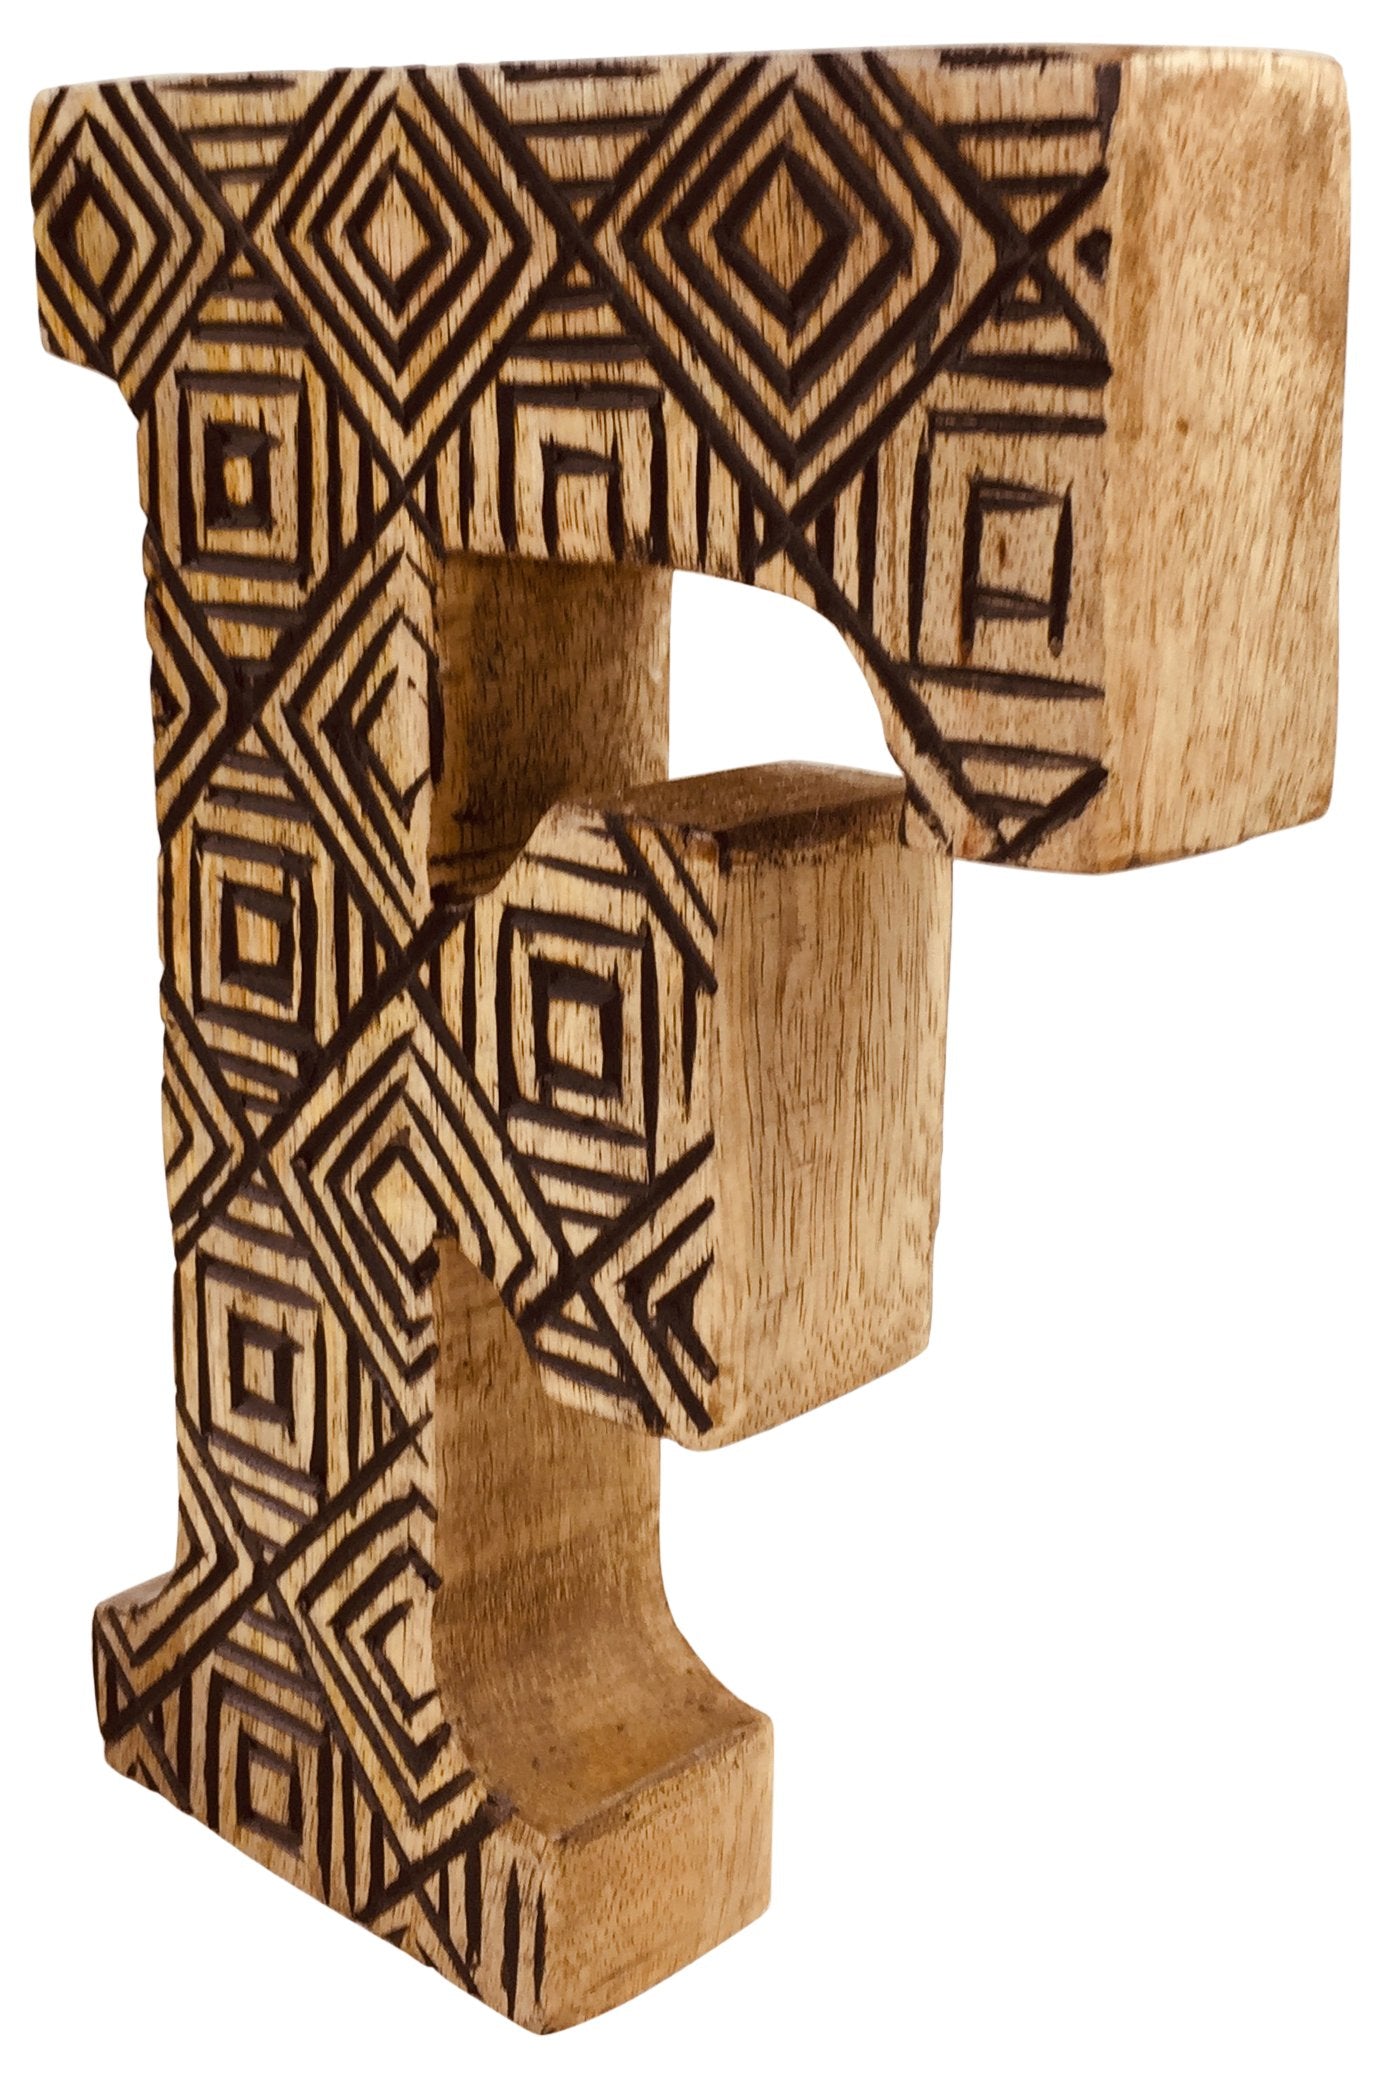 Hand Carved Wooden Geometric Letter F